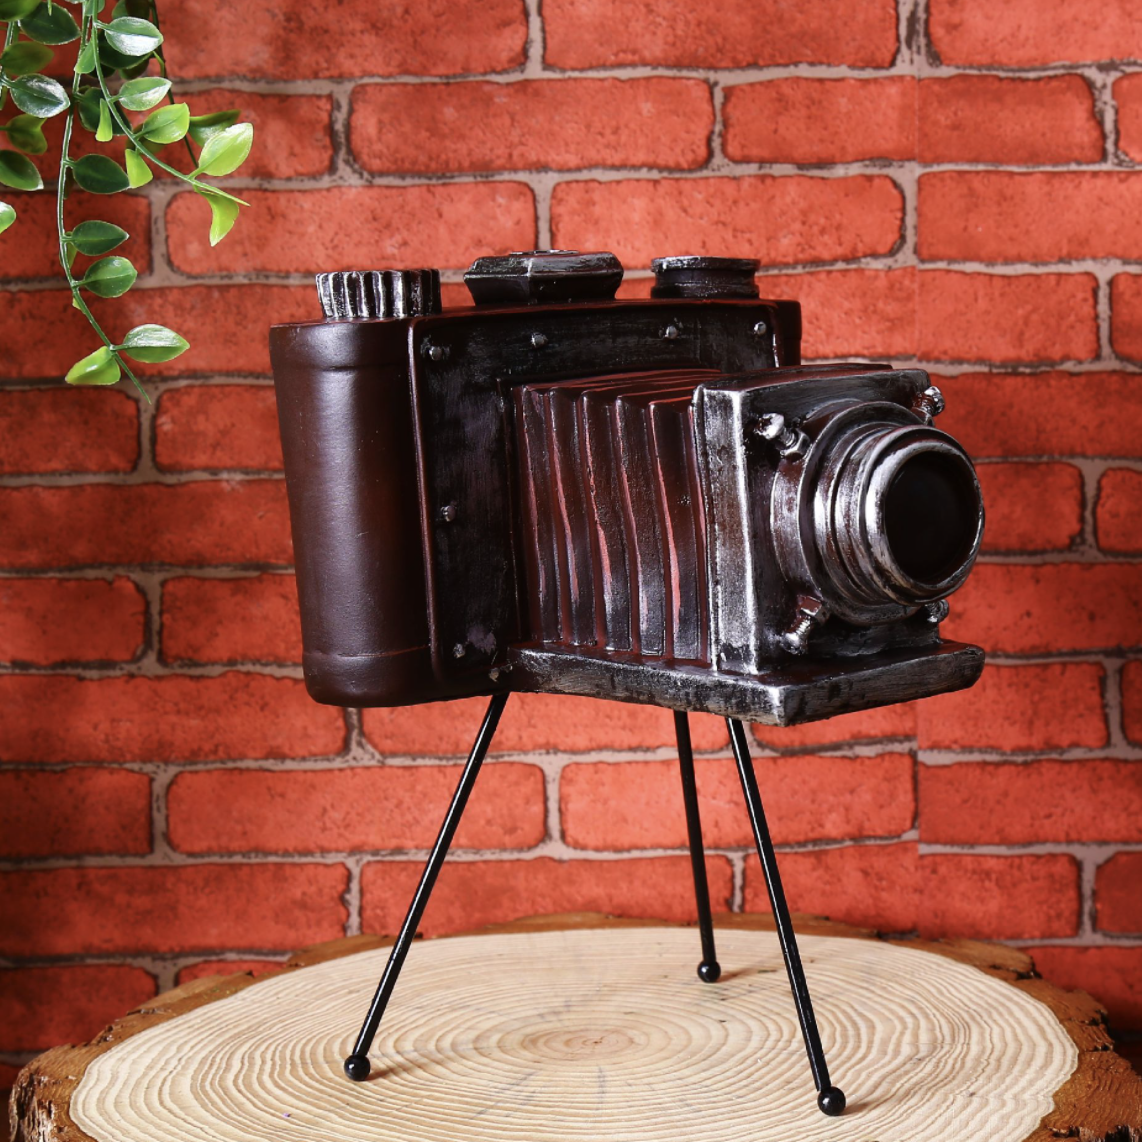 Early Large Polaroid Camera Circa 1948-1959 Display Cameras, Set of 10, for  Your Own Decorative Display | Chairish